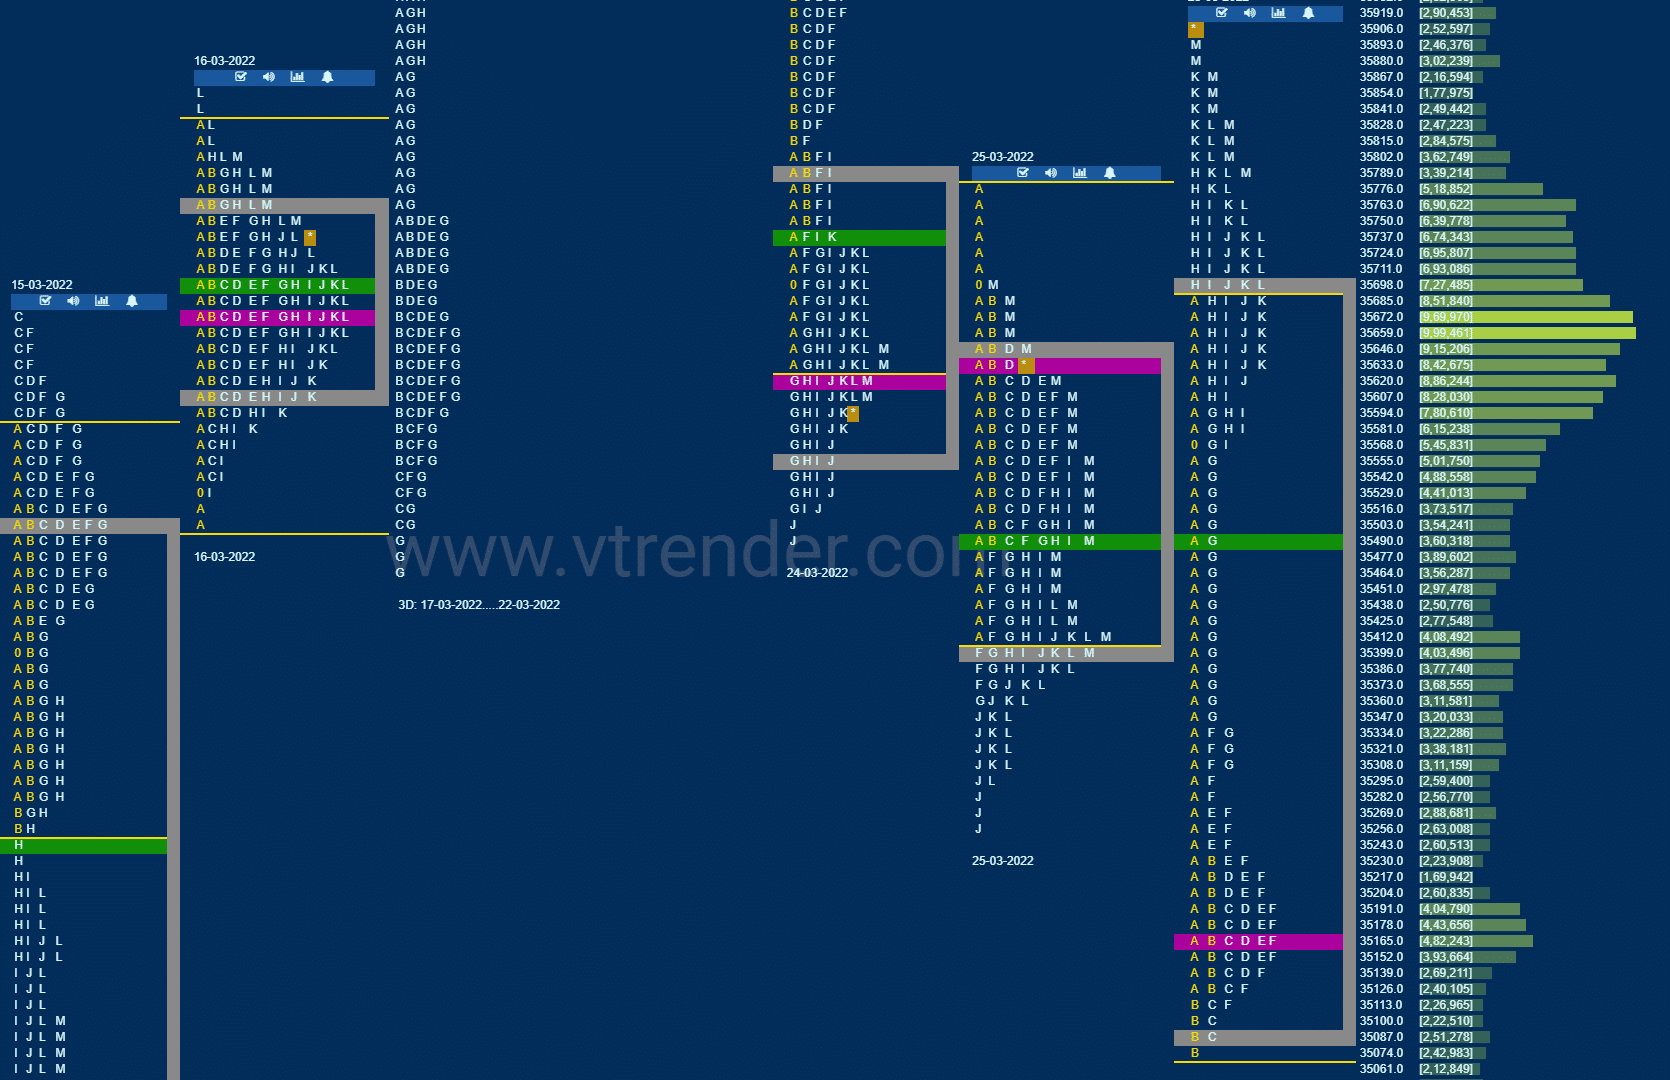 Bnf 17 Market Profile Analysis Dated 28Th March 2022 Banknifty Futures, Charts, Day Trading, Intraday Trading, Intraday Trading Strategies, Market Profile, Market Profile Trading Strategies, Nifty Futures, Order Flow Analysis, Support And Resistance, Technical Analysis, Trading Strategies, Volume Profile Trading